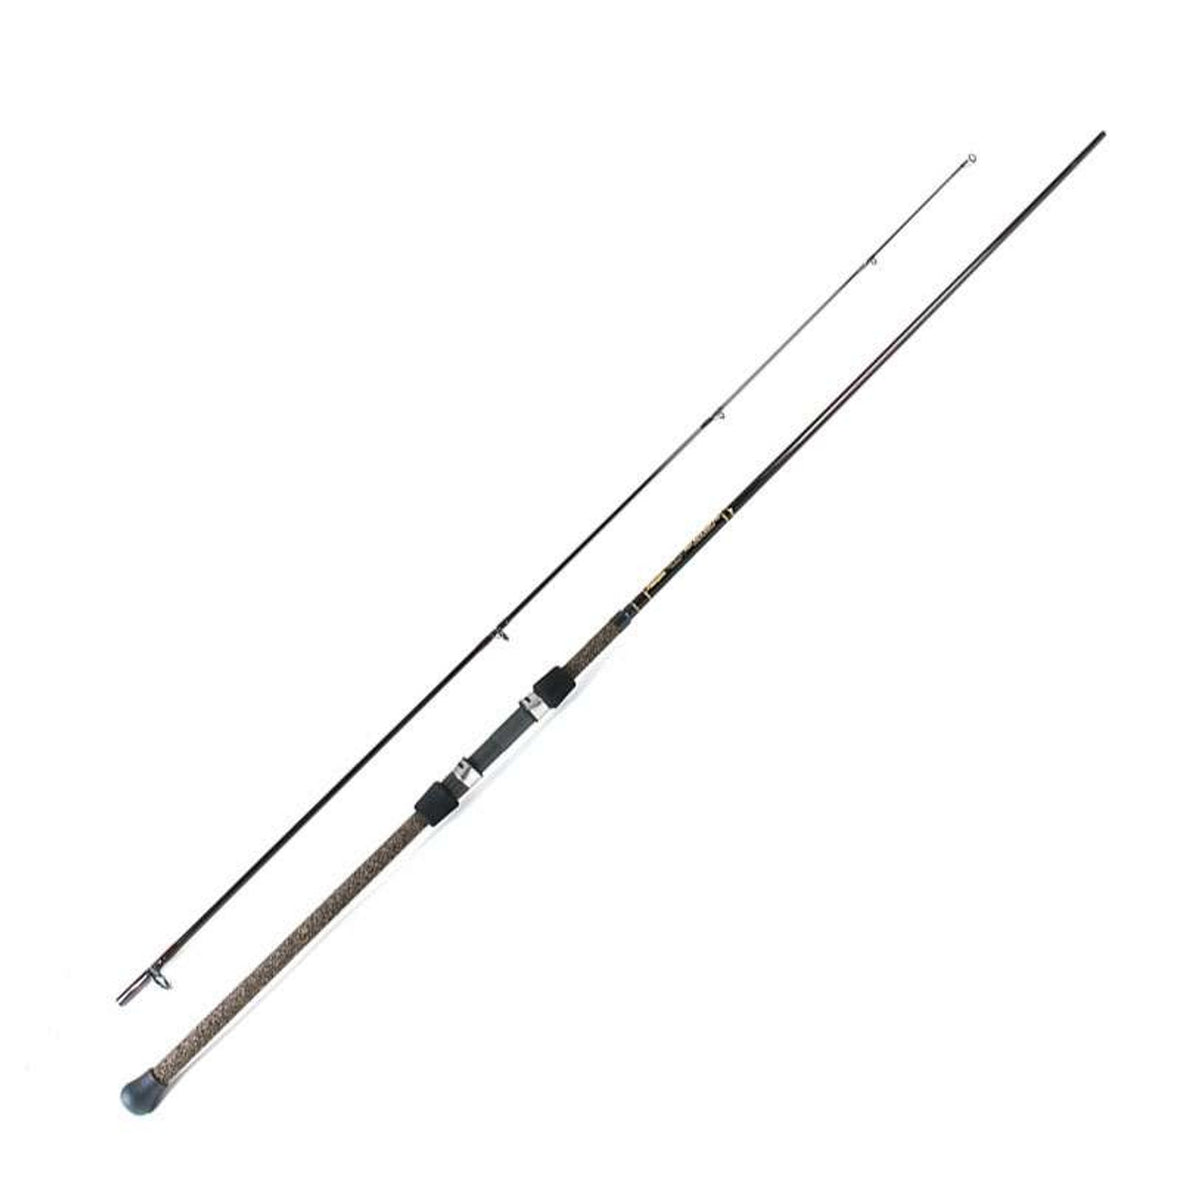 Lamiglass Surf Pro 10FT6IN (17-40#) - 1261MH